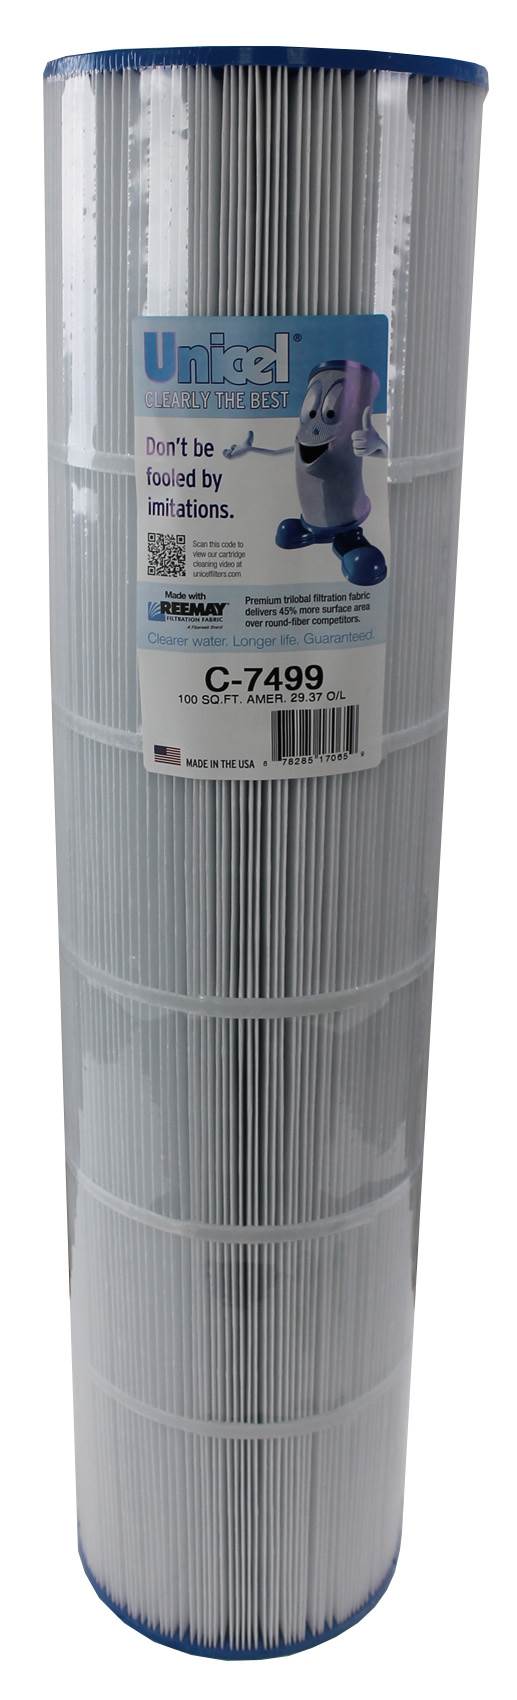 2) Unicel C-7499 Spa Replacement Cartridge Filters 100 Sq Ft American Premier